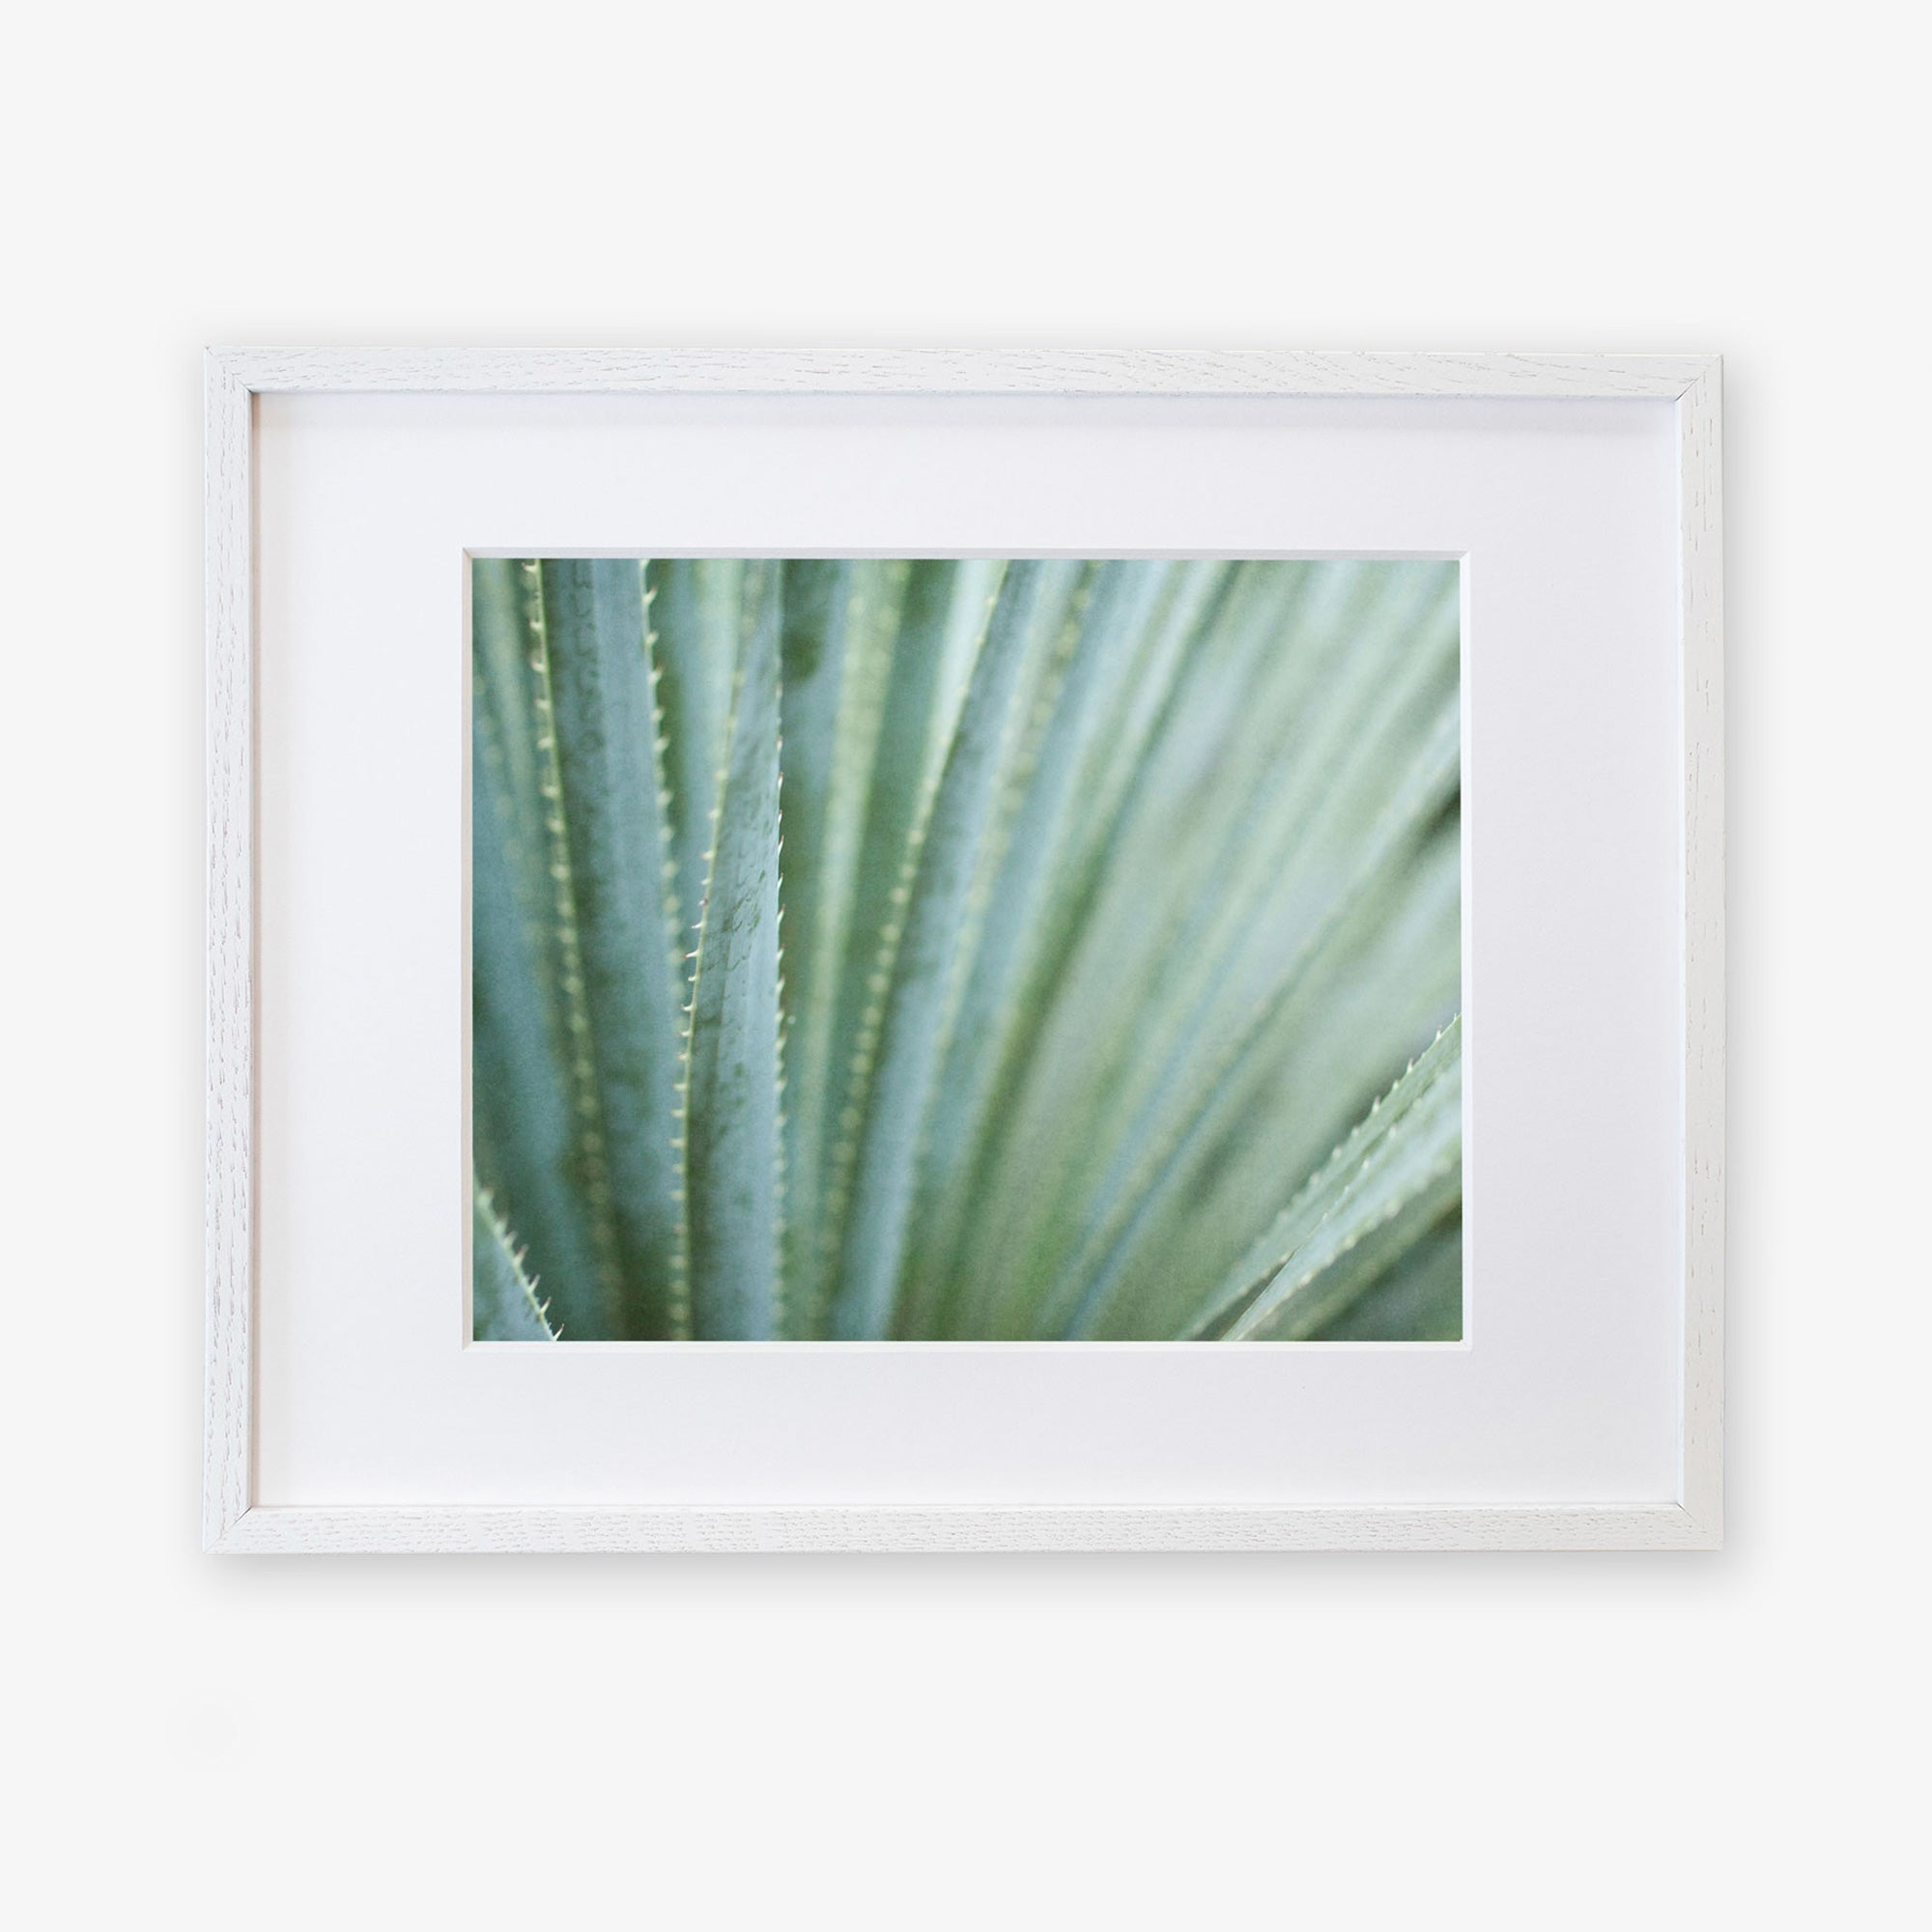 A framed photograph of Abstract Green Botanical Print, &#39;Strands and Spikes&#39; by Offley Green, visually emphasizing texture and natural patterns, printed on archival photographic paper and displayed in a simple white frame against a white backdrop.